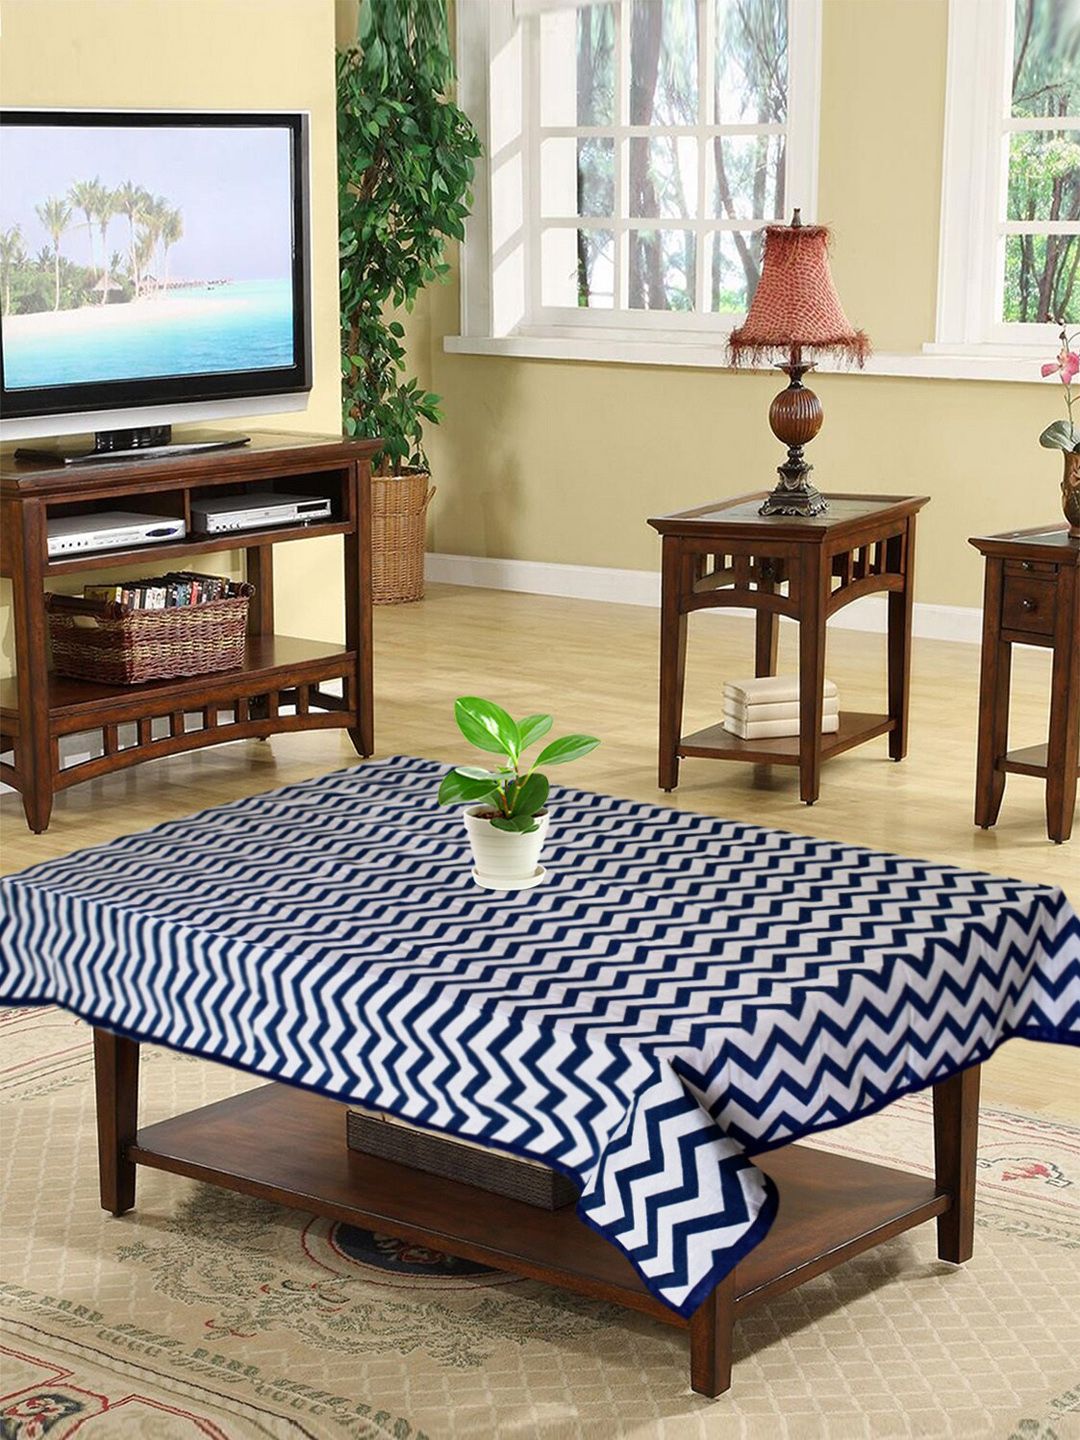 Kuber Industries Blue & White Printed 4 Seater Cotton Table Cover Price in India